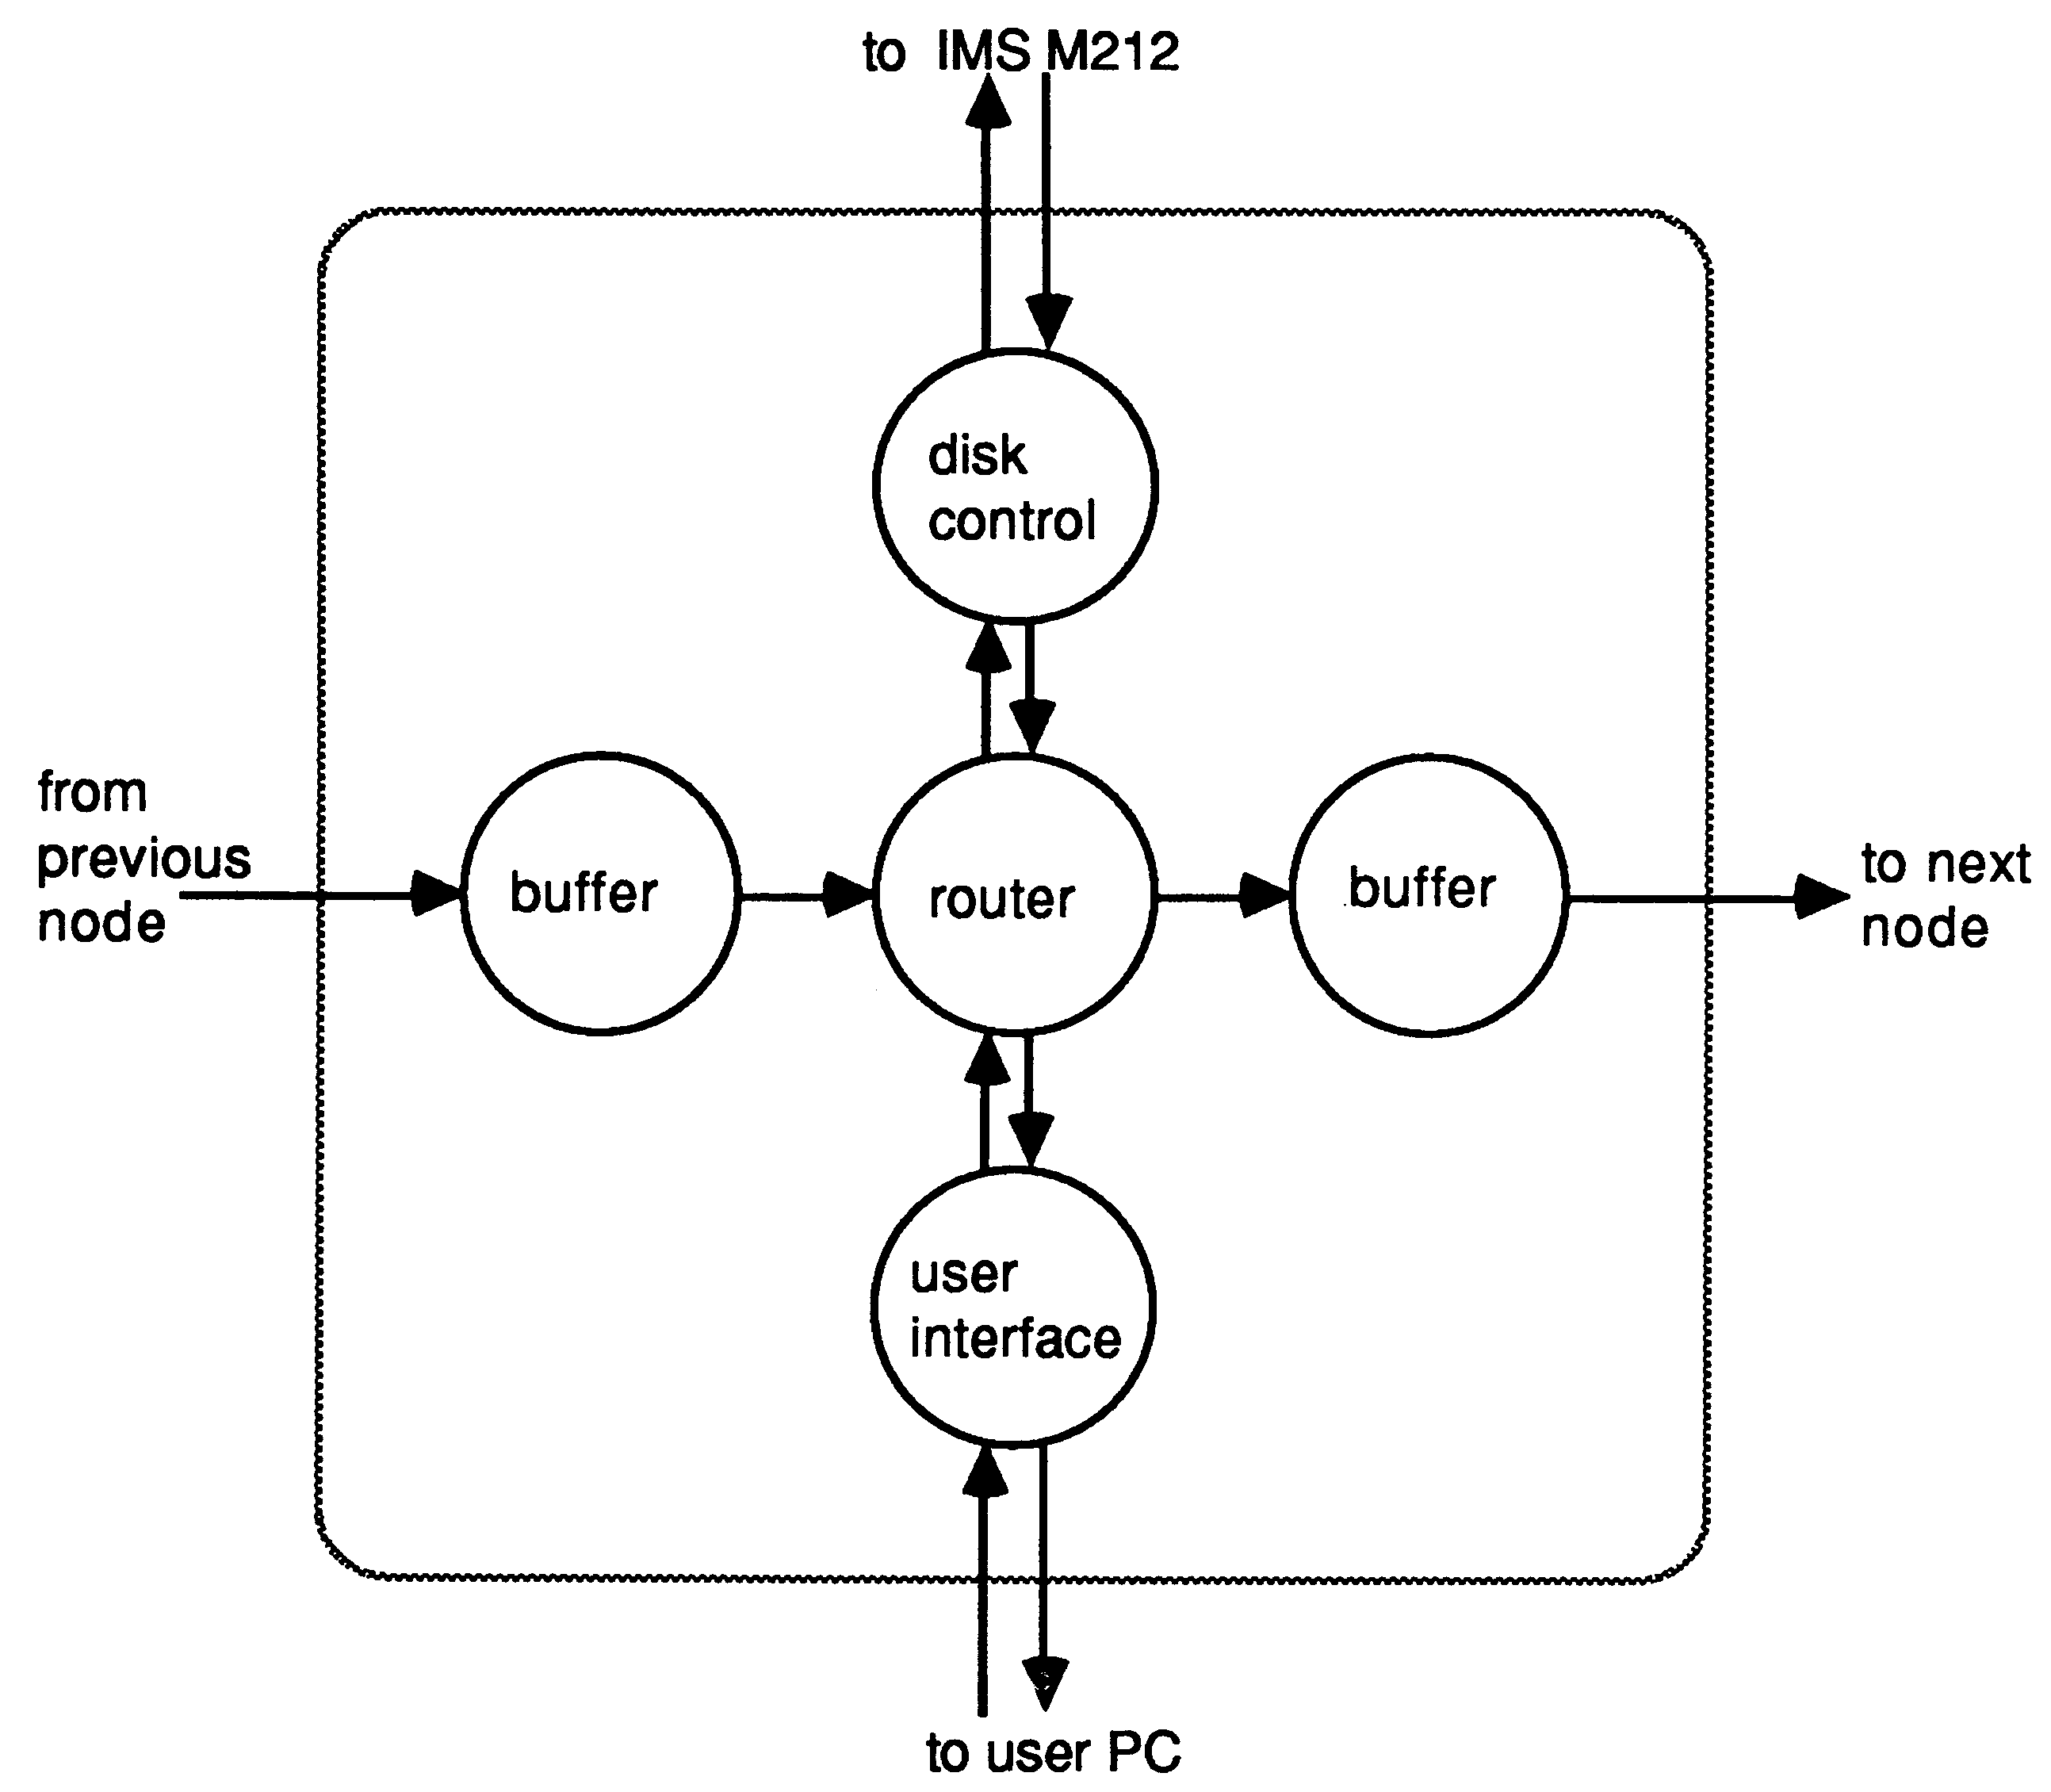 The concurrent processes
running on each node